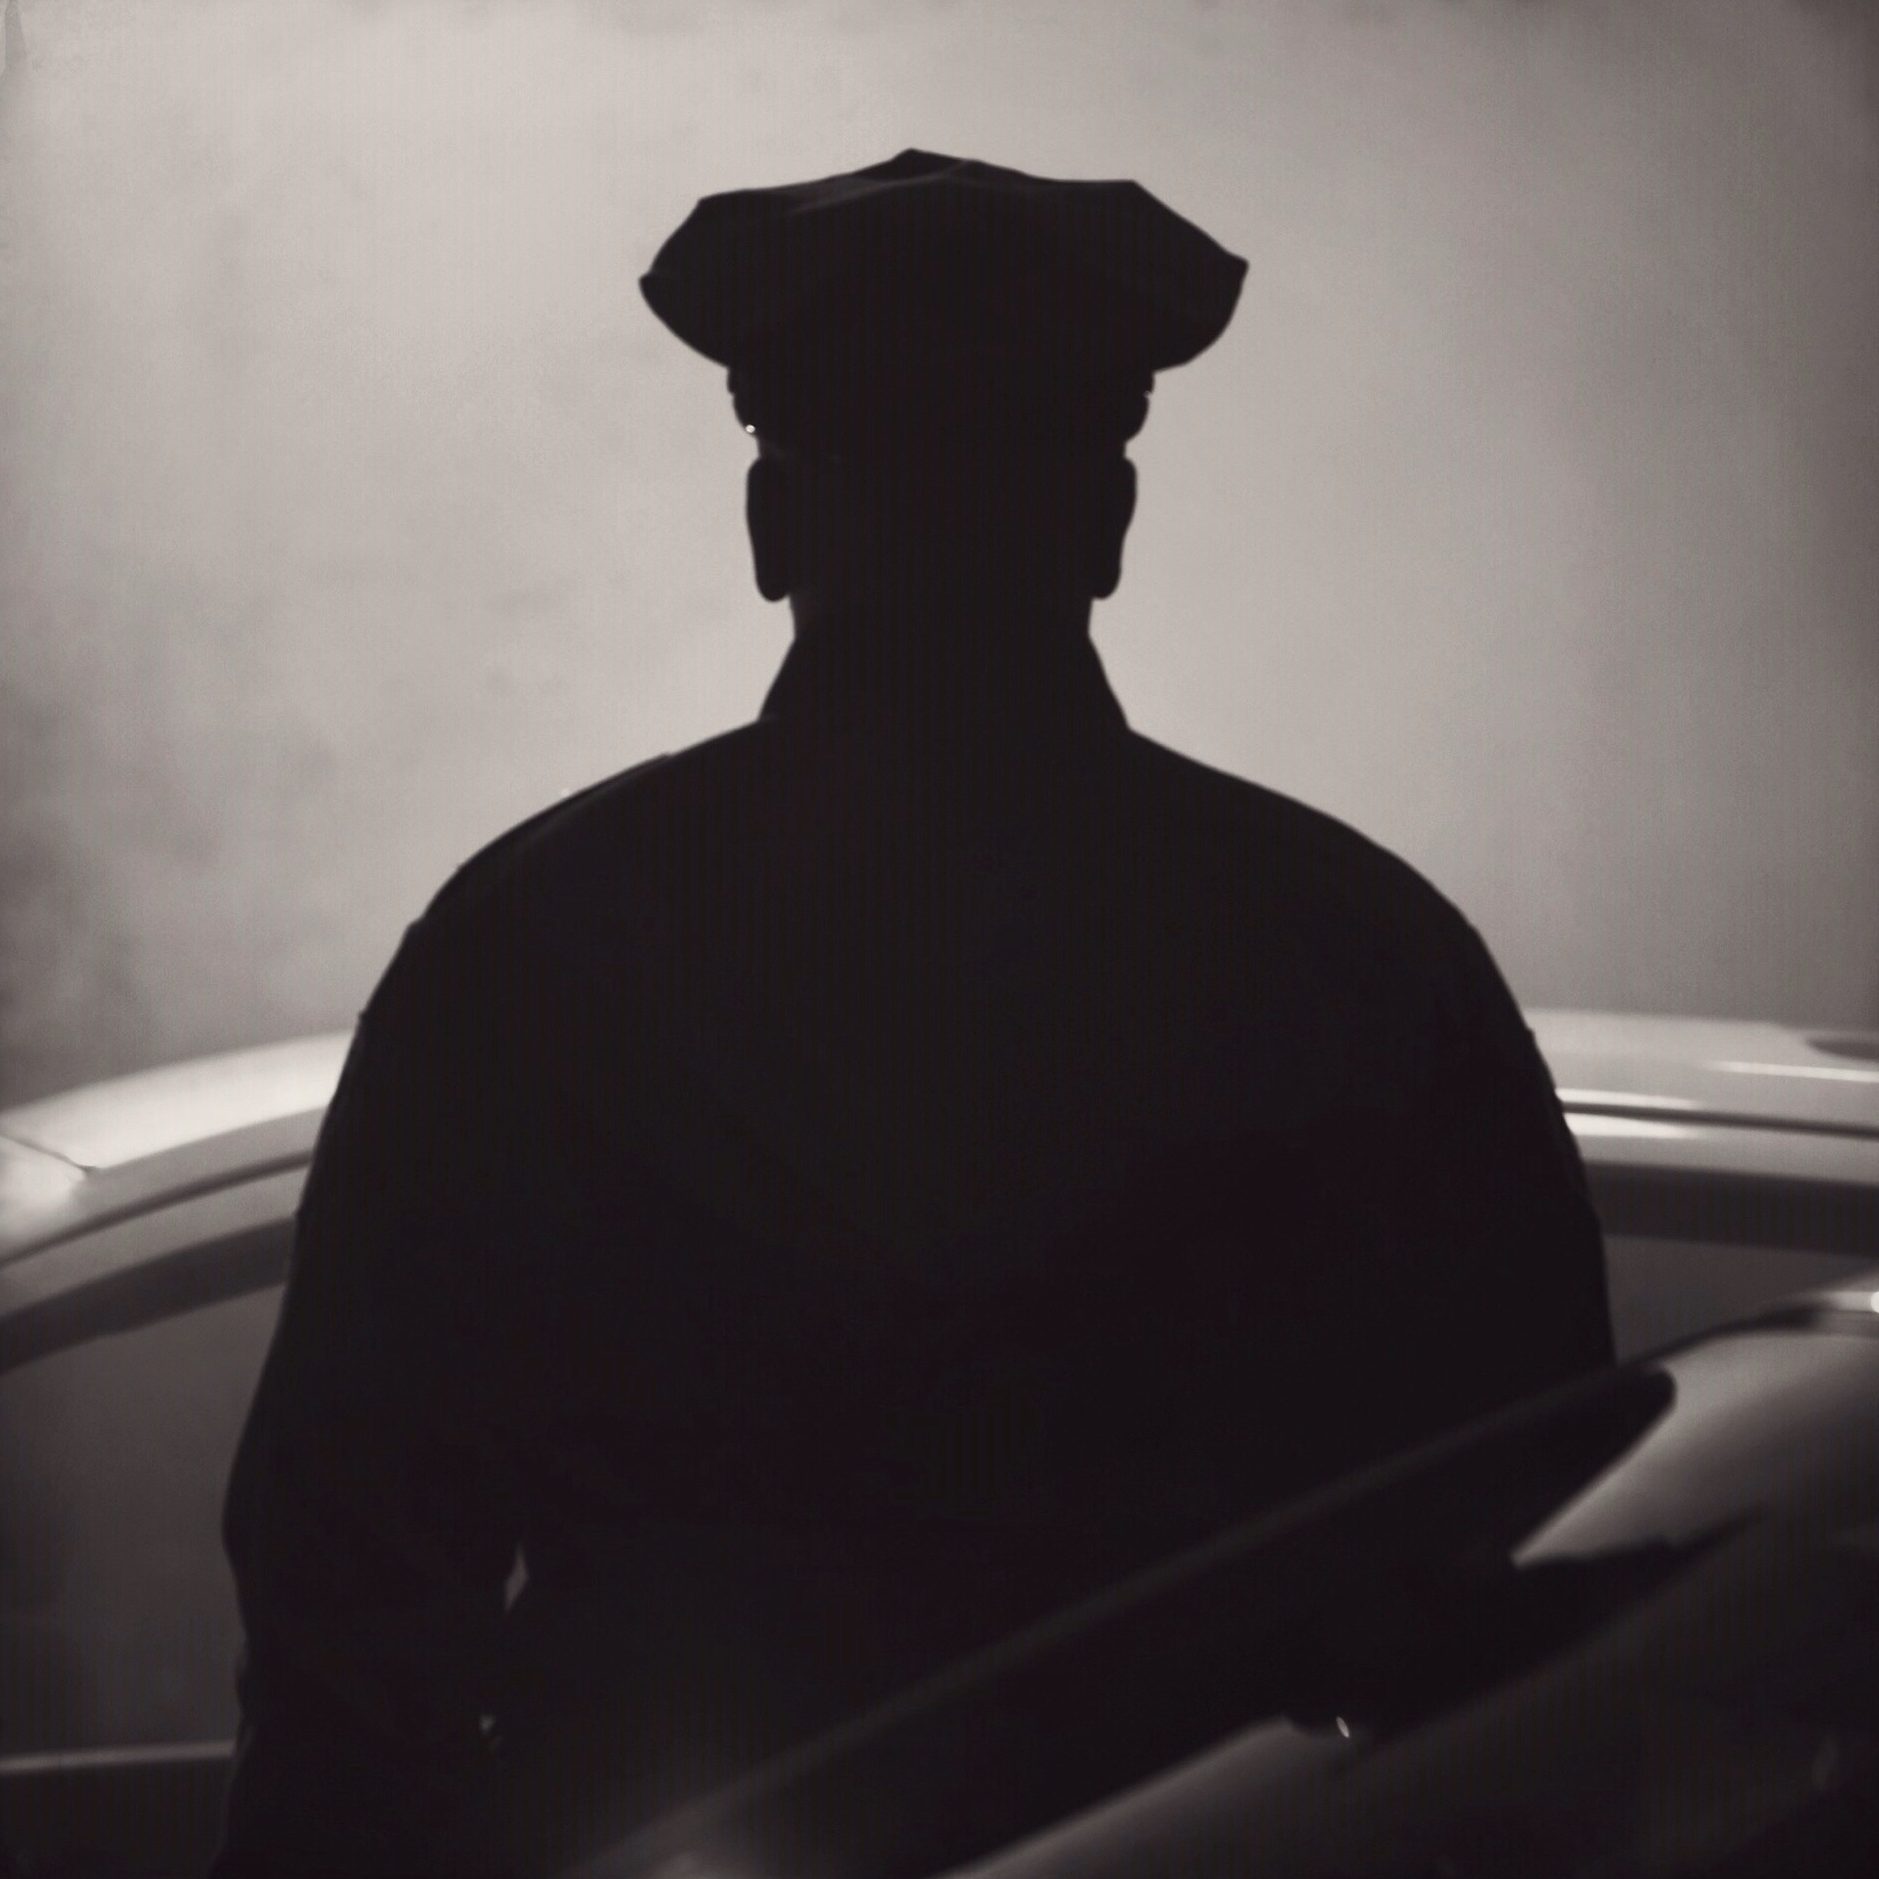 The silhouette of a police officer